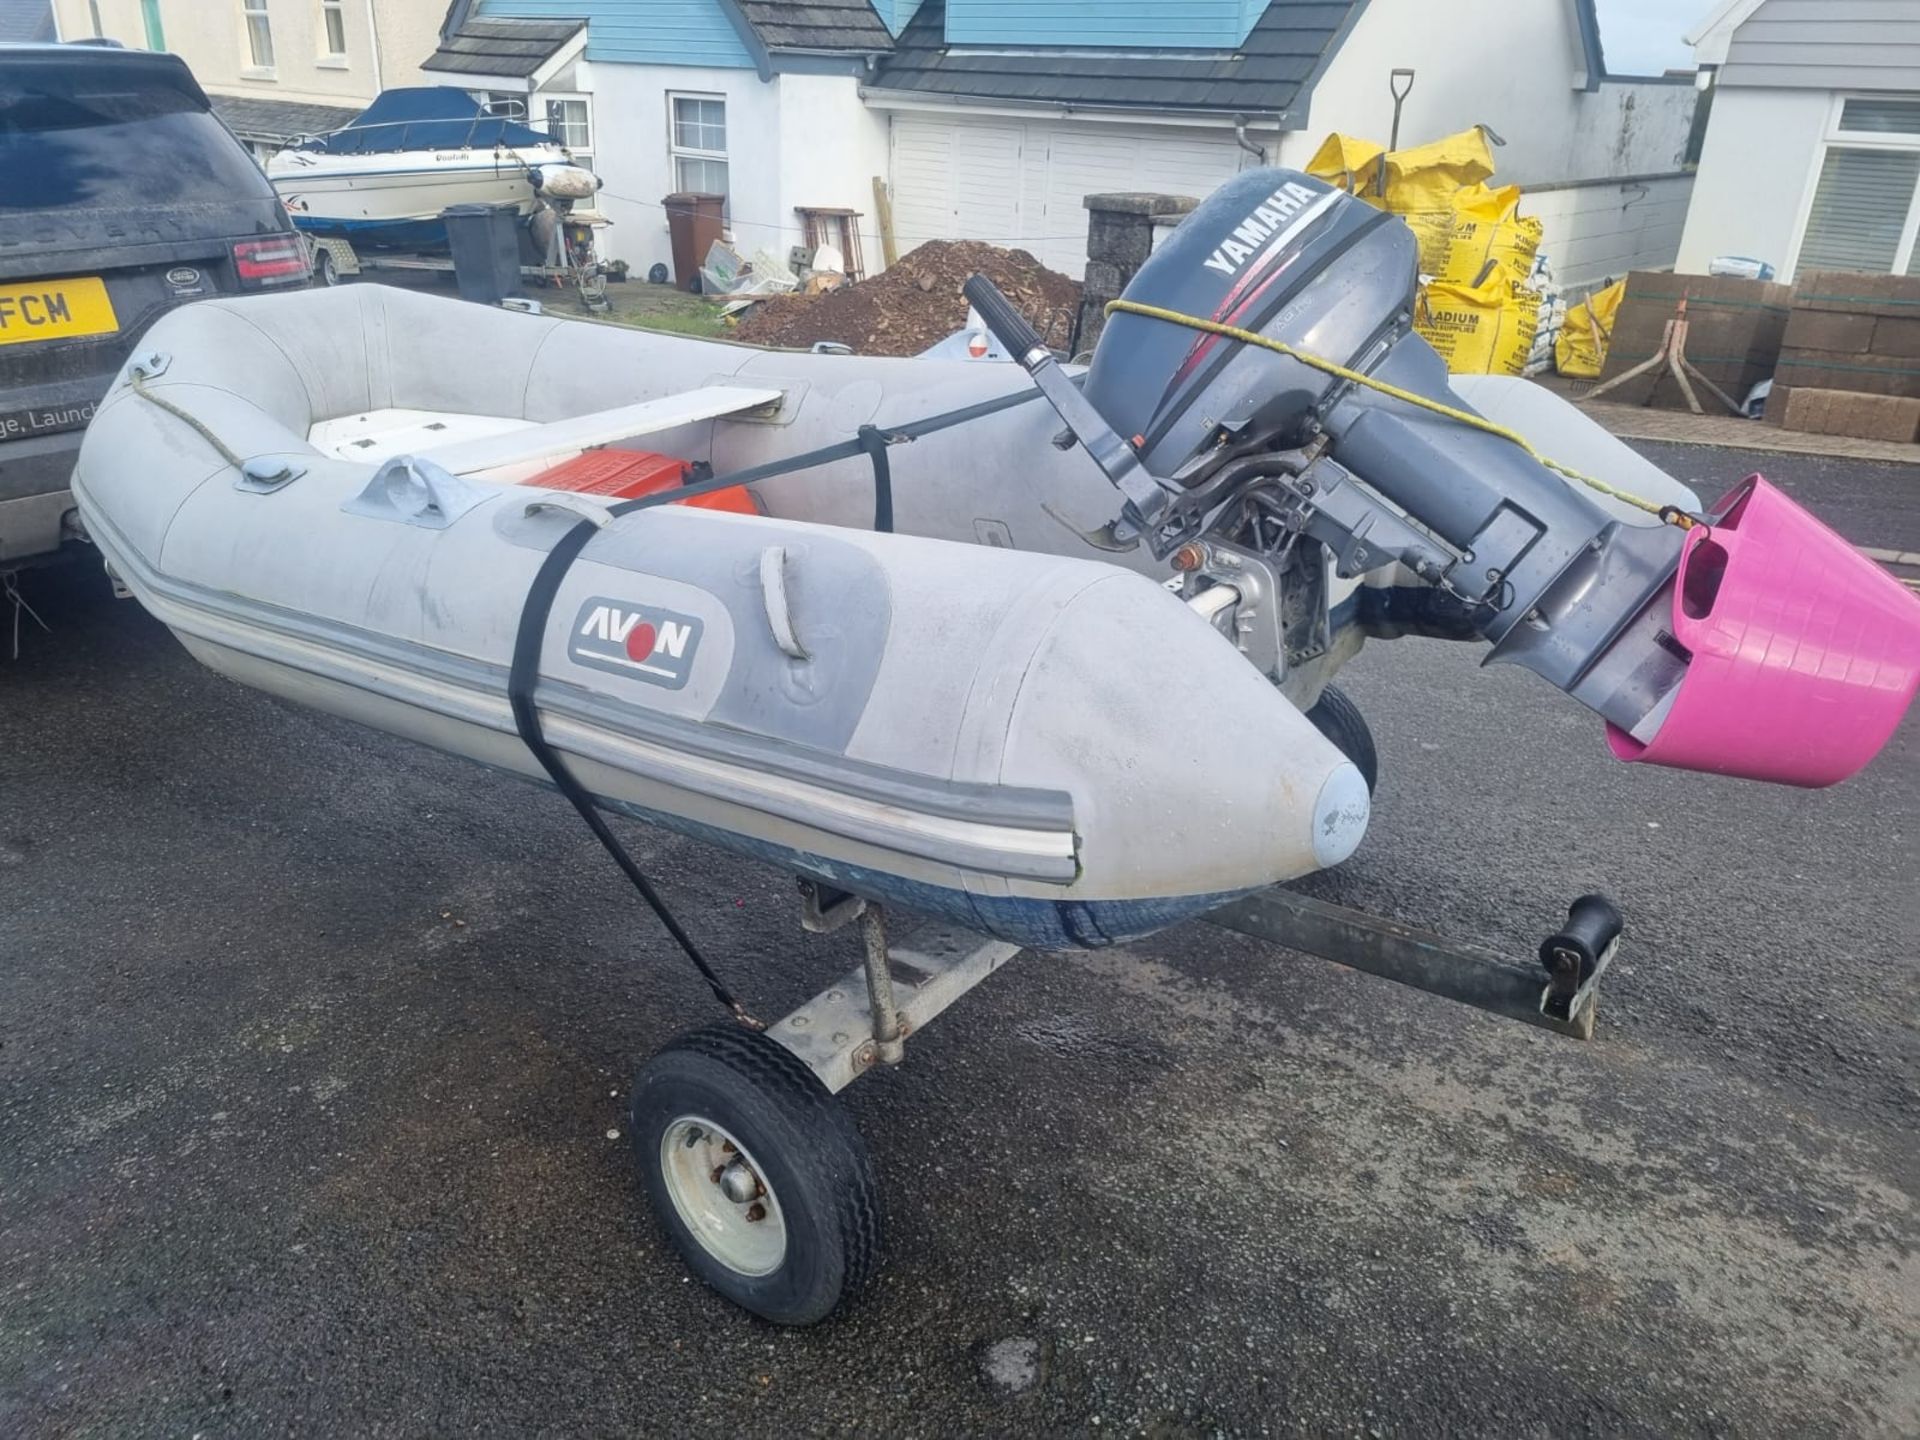 2002 Avon rigid inflatable boat with Yamaha 15HP two stroke engine. - Image 2 of 4